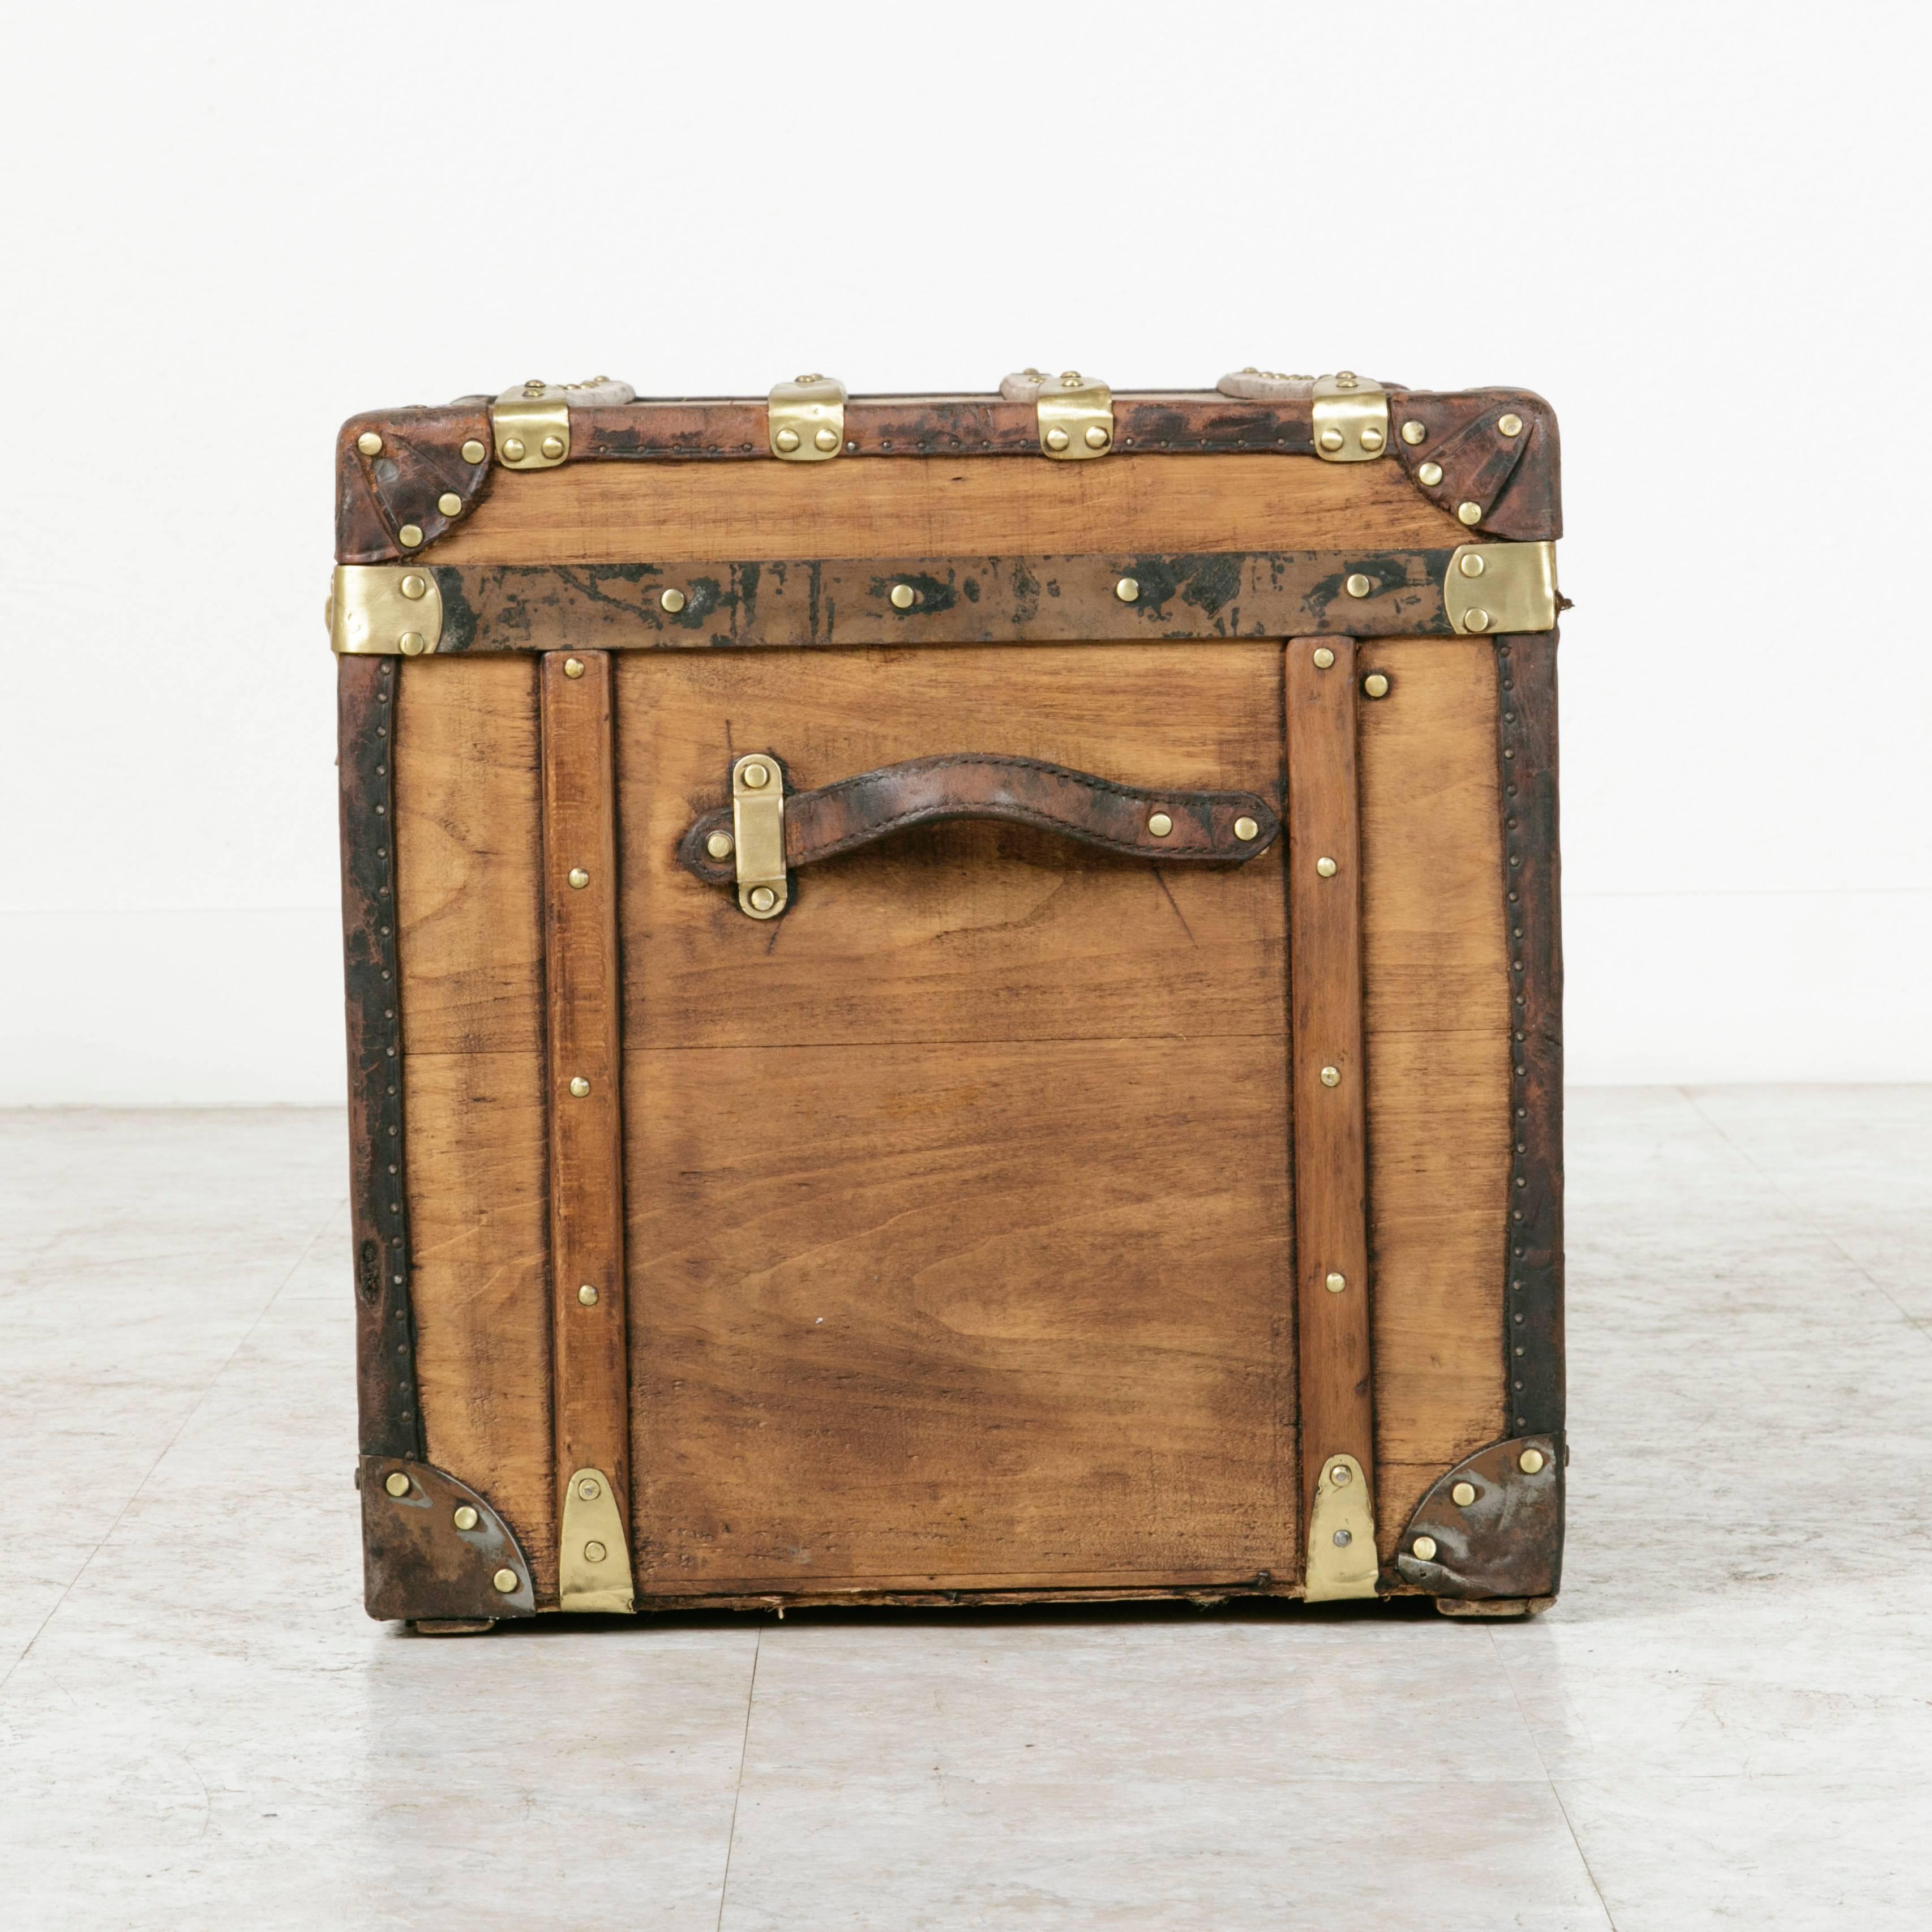 20th Century Antique French Traveling Steam Trunk of Wood, Brass, Leather and Iron